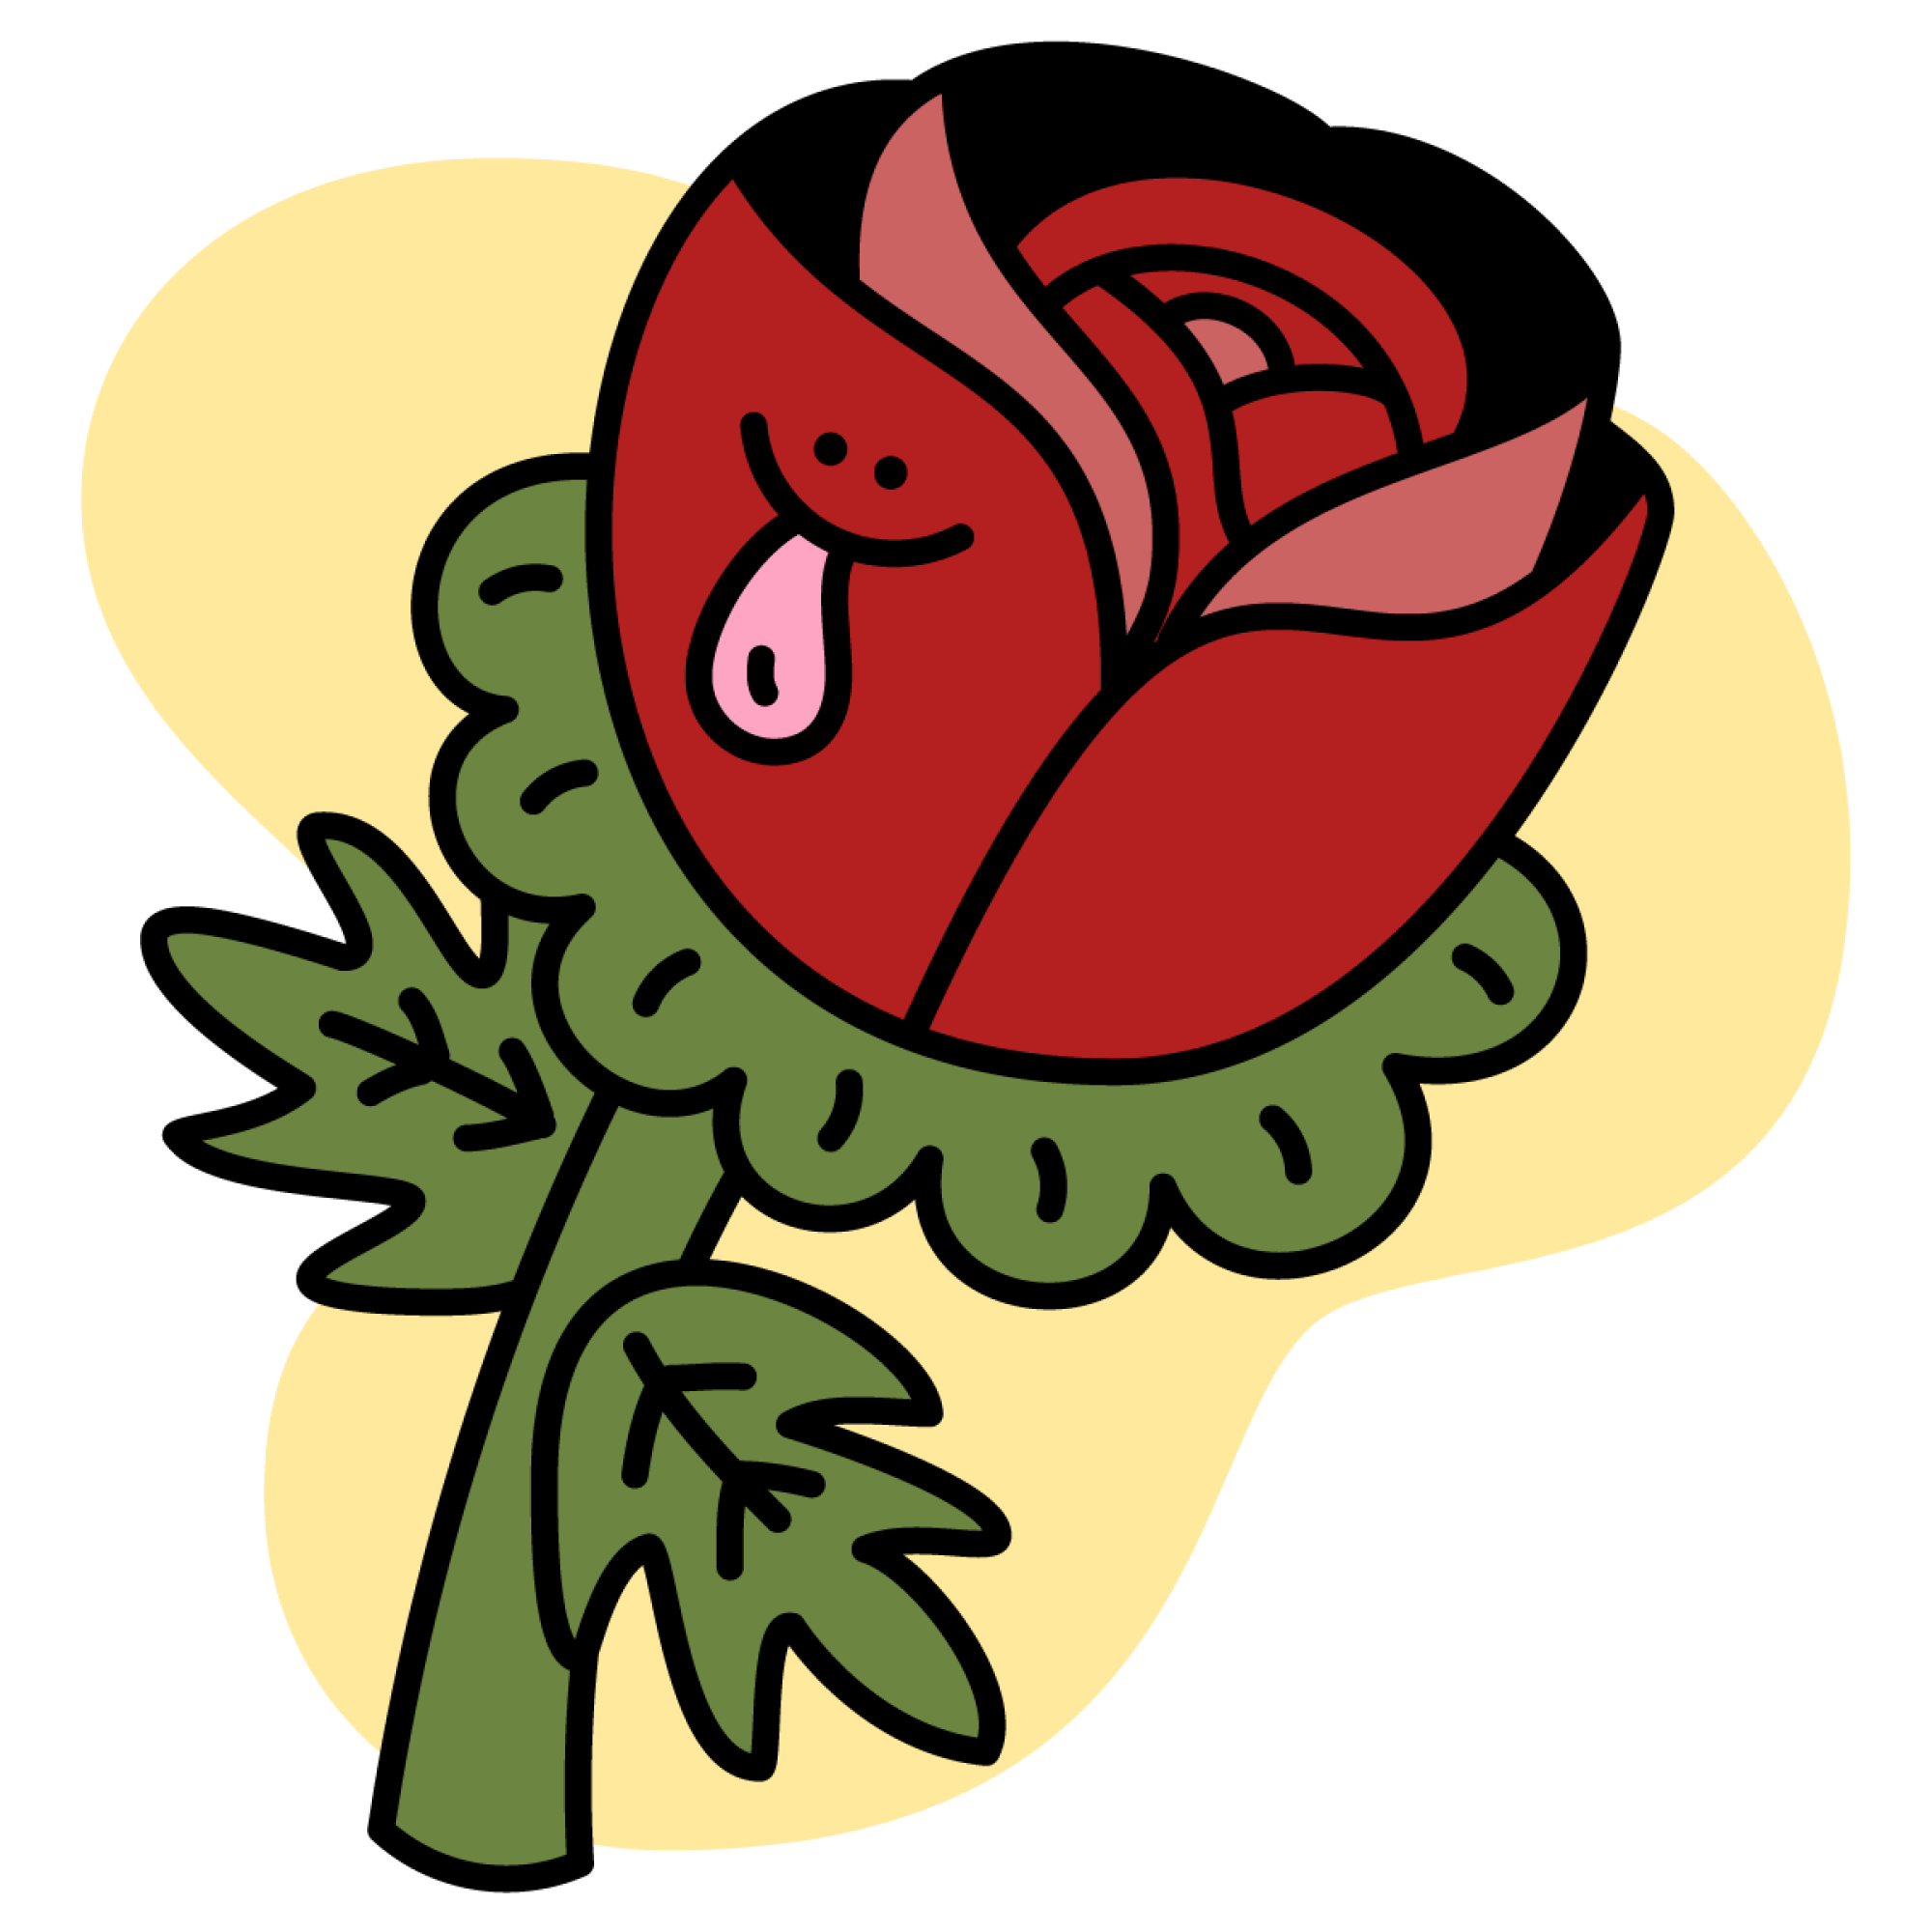 Illustration of a rose with a smiley face on it